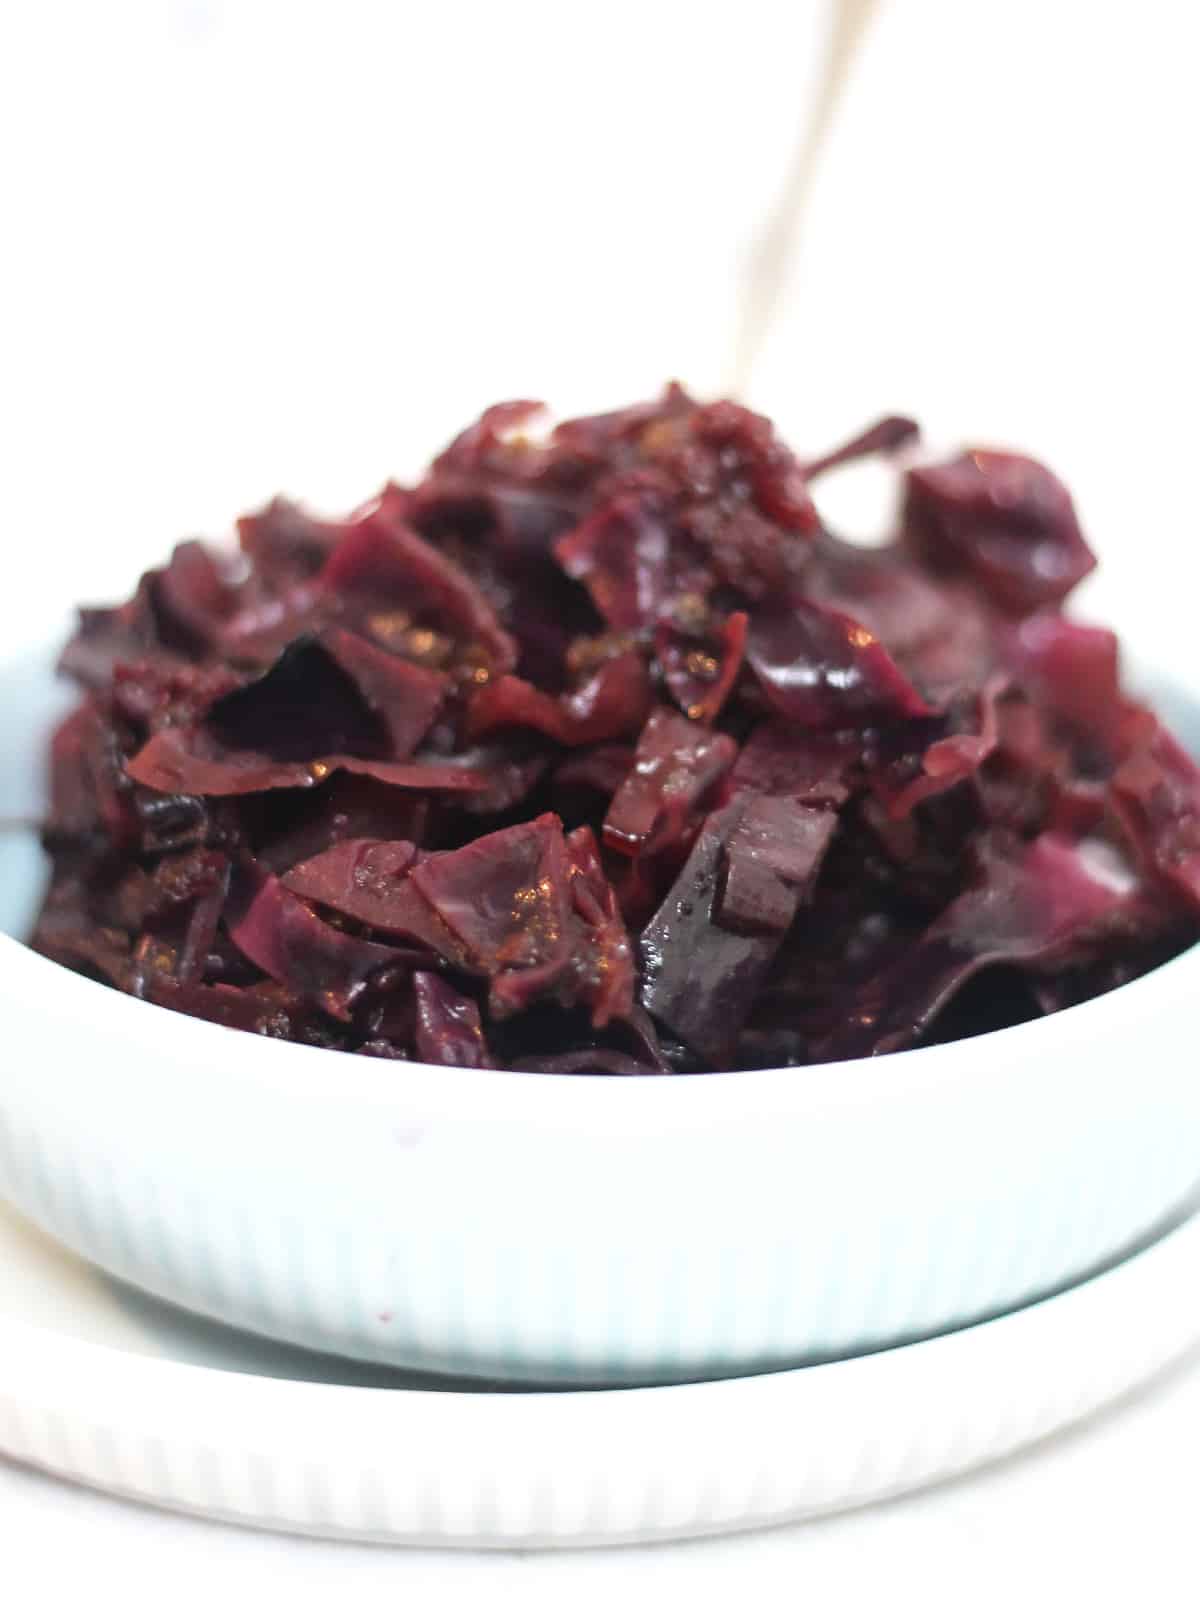 Balsamic braised red cabbage in a bowl with a fork.